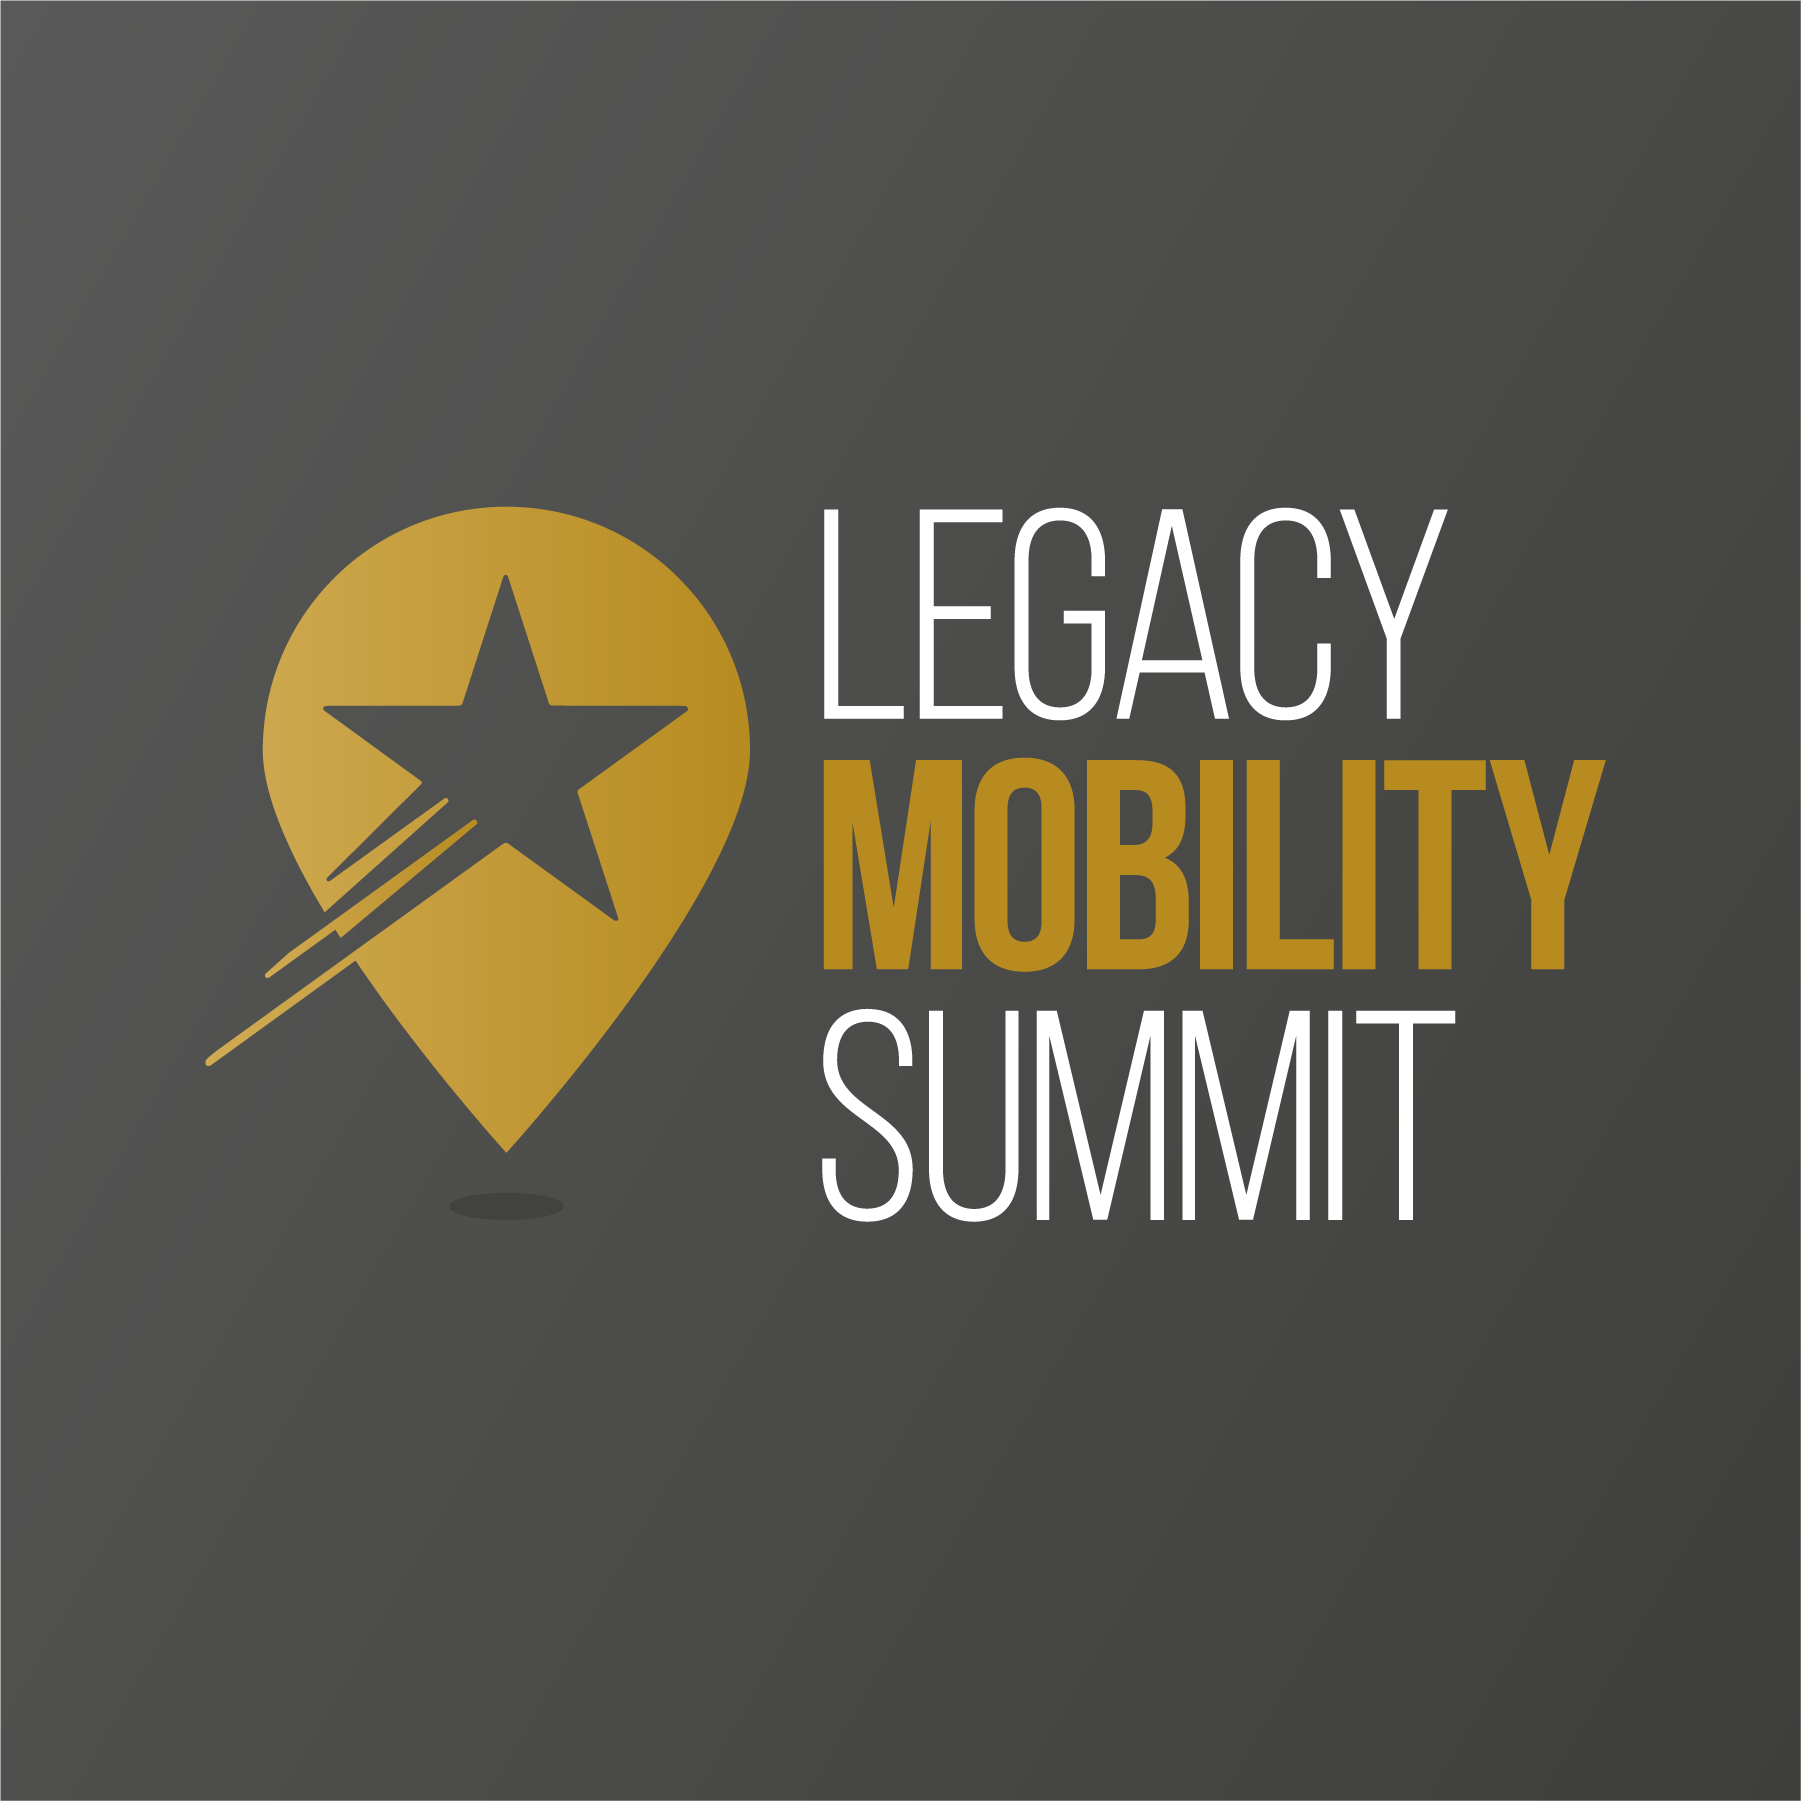 Plano Legacy Mobility Summit Logo Gray Background.png